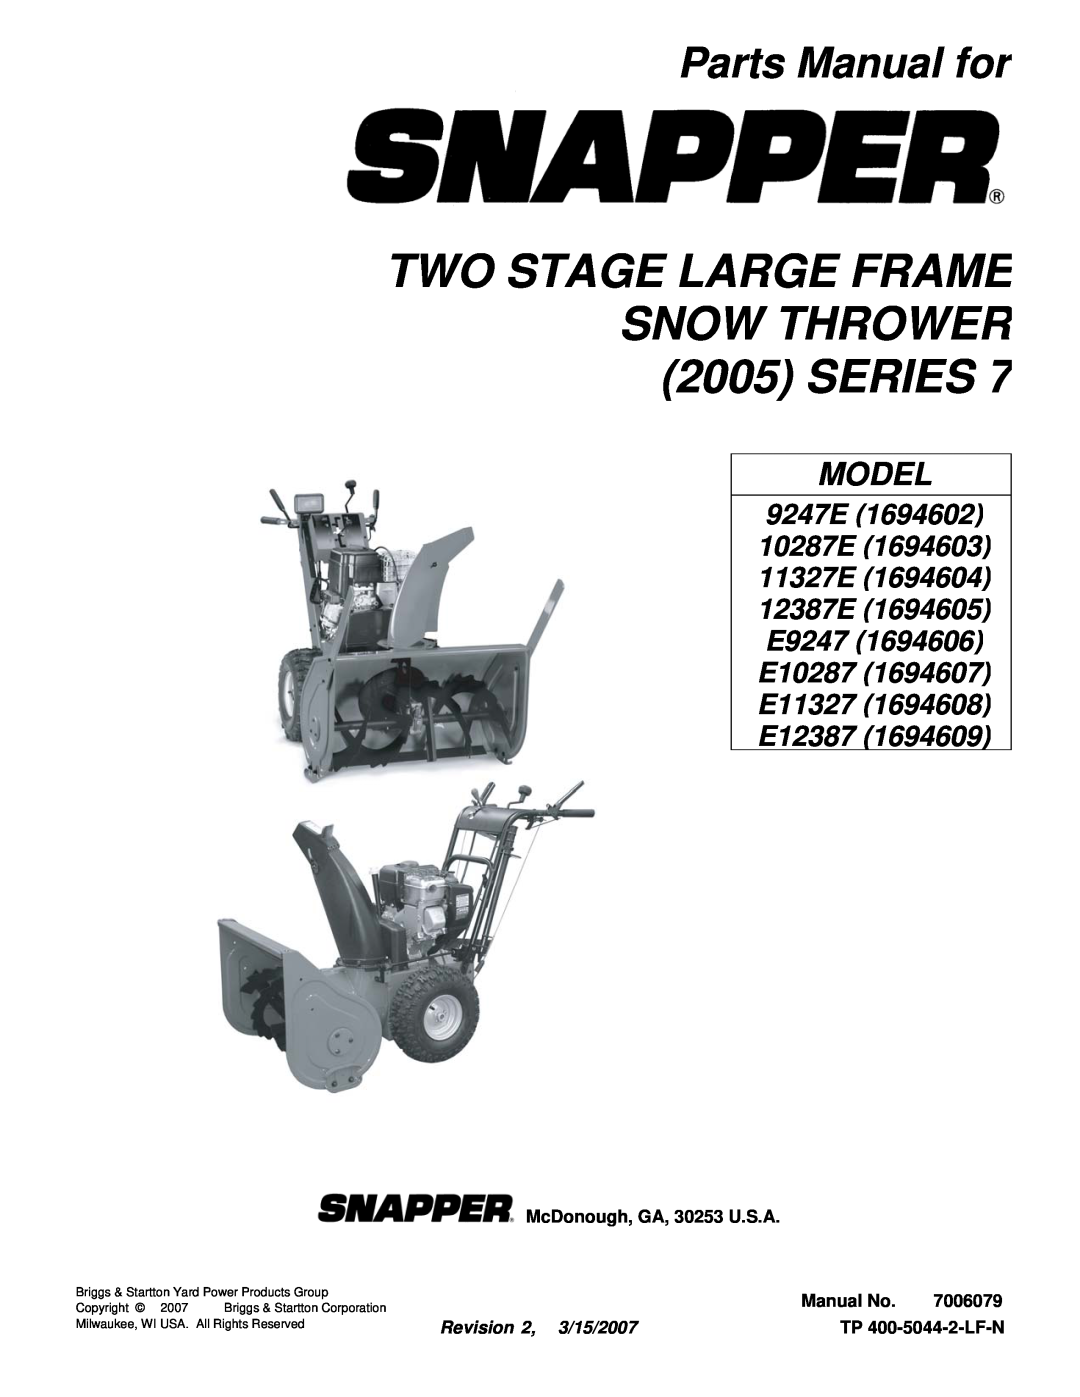 Snapper E10287 manual TWO STAGE LARGE FRAME SNOW THROWER 2005 SERIES, Parts Manual for, Revision 2, 3/15/2007, Model 